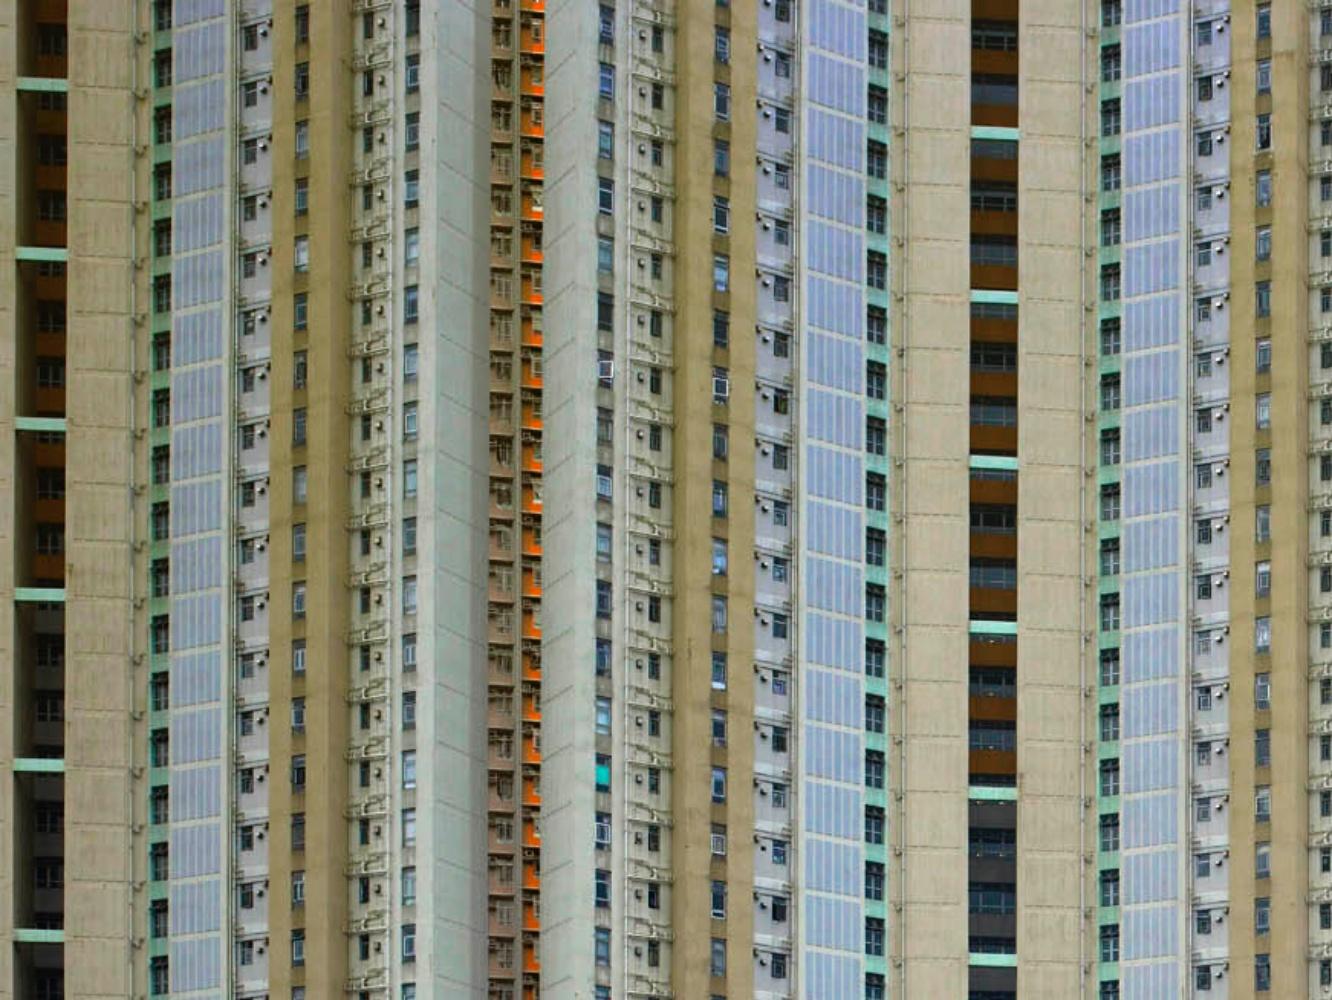 Michael WOLF (1954 – 2019, Germany)
Architecture of Density #111, 2008
C–print
Sheet 121.9 x 152.4 cm (48 x 60 in.) 
Edition of 9, plus 2 AP; Ed. no. 5/9
Print only

– Michael Wolf

Michael Wolf was born in 1954 in Munich, Germany. He worked and